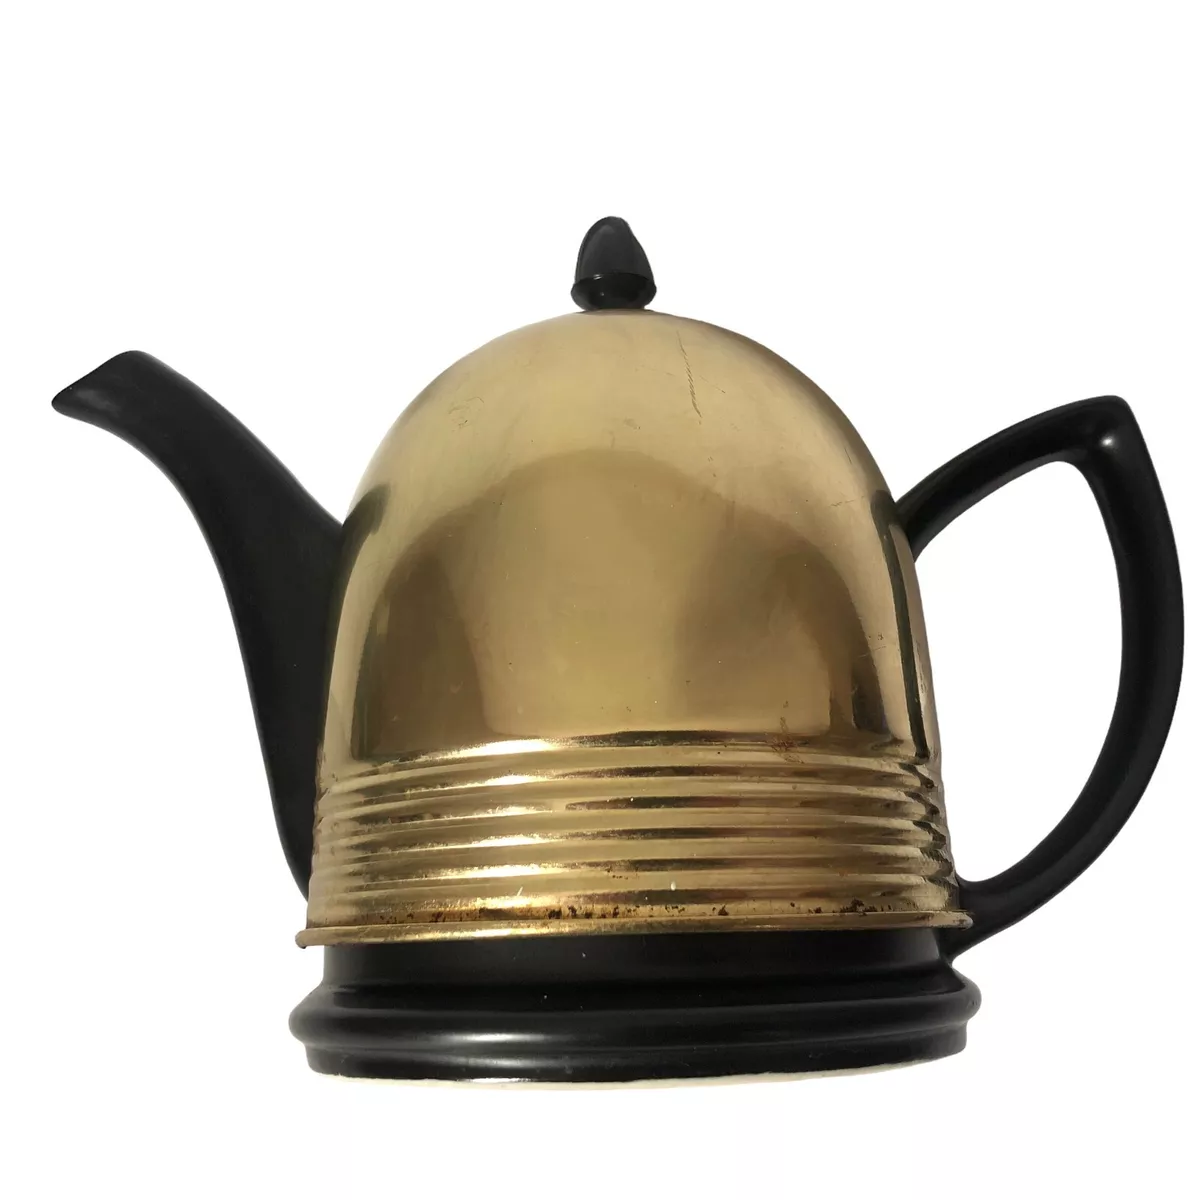 Vintage Ceramic Black Teapot with Gold Metal Insulated Cozy Cover Kettle